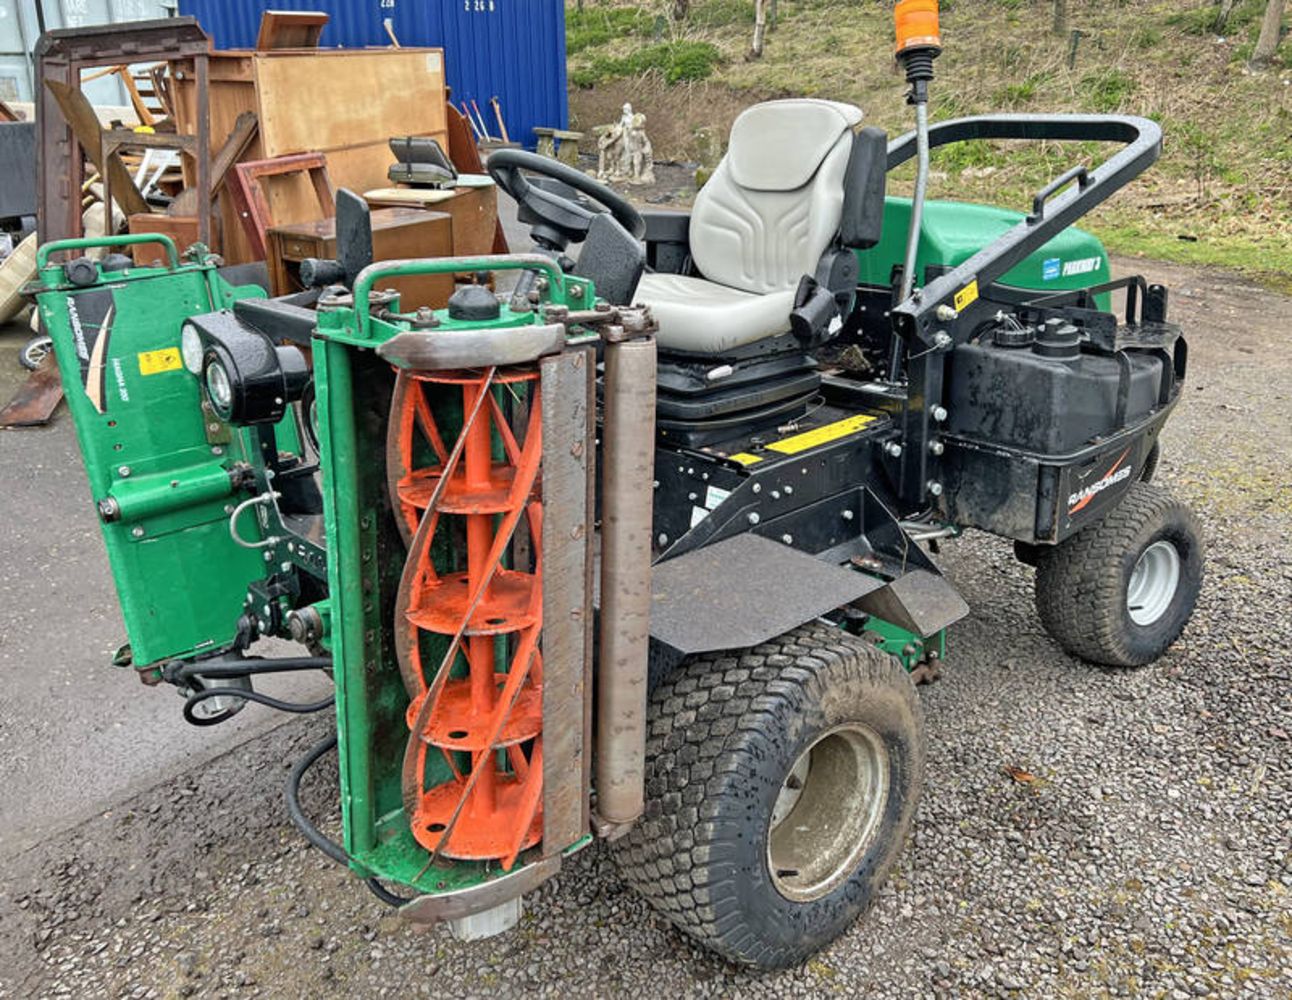 The Angus Council Sale of Ground Care Machinery